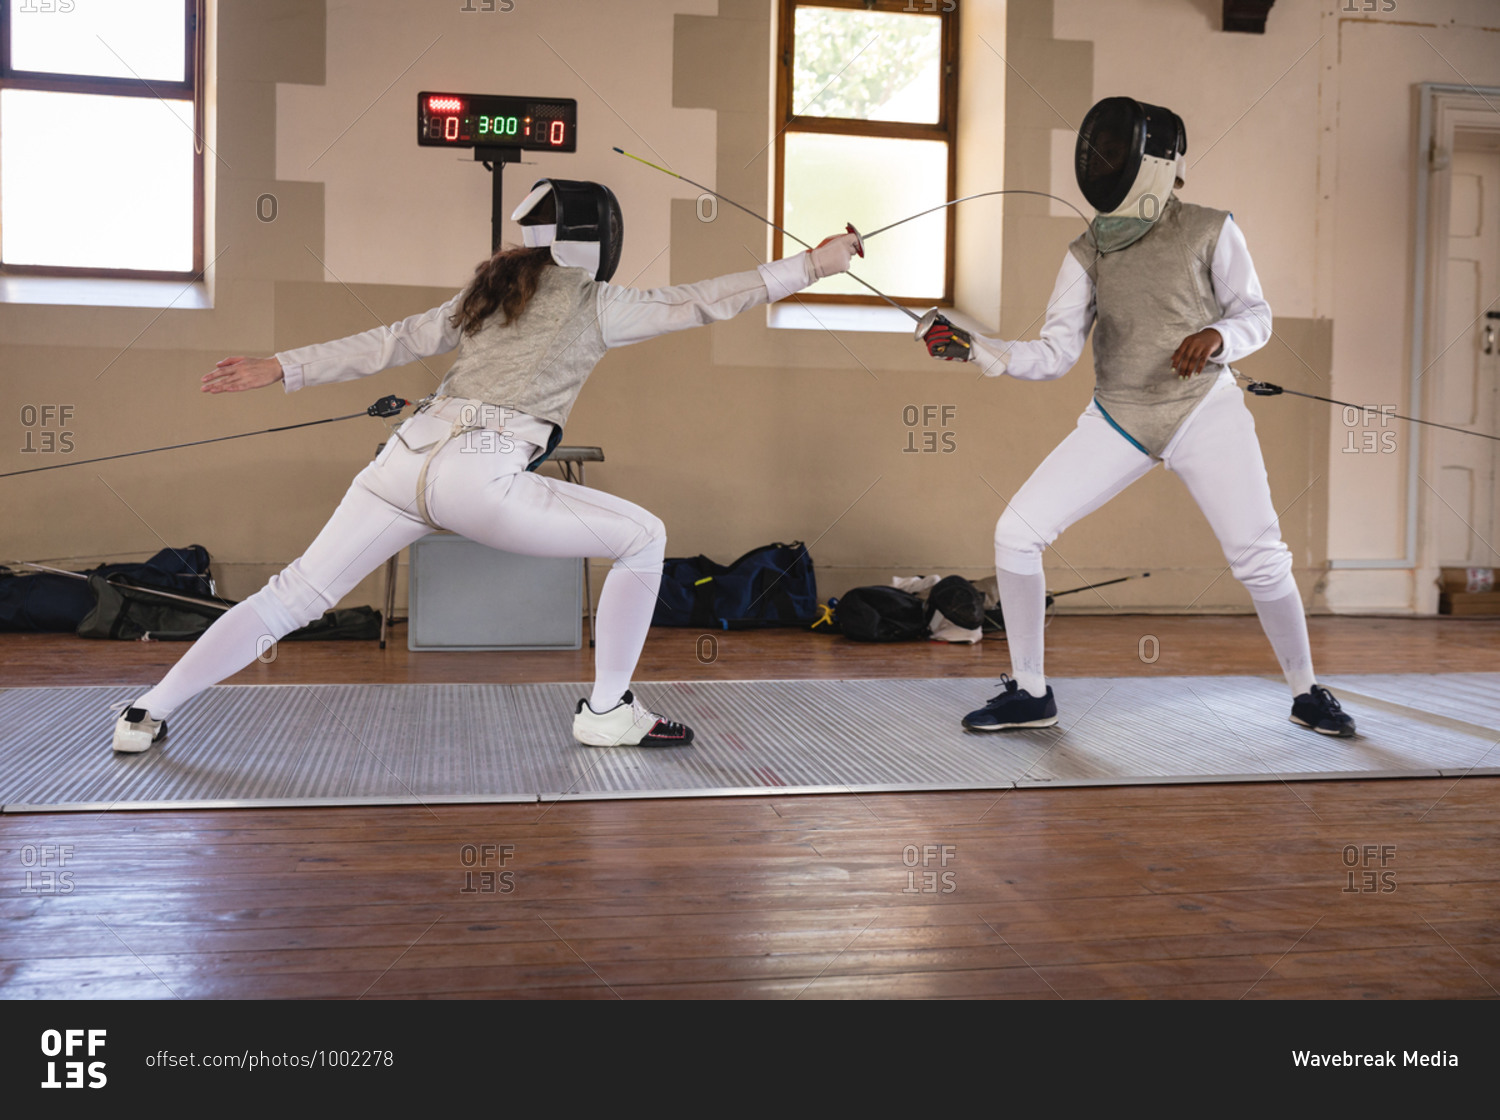 Caucasian and African American sportswomen wearing protective fencing outfits during a fencing training session, jumping taking aim at each other with their epees. Fencers training at gym.